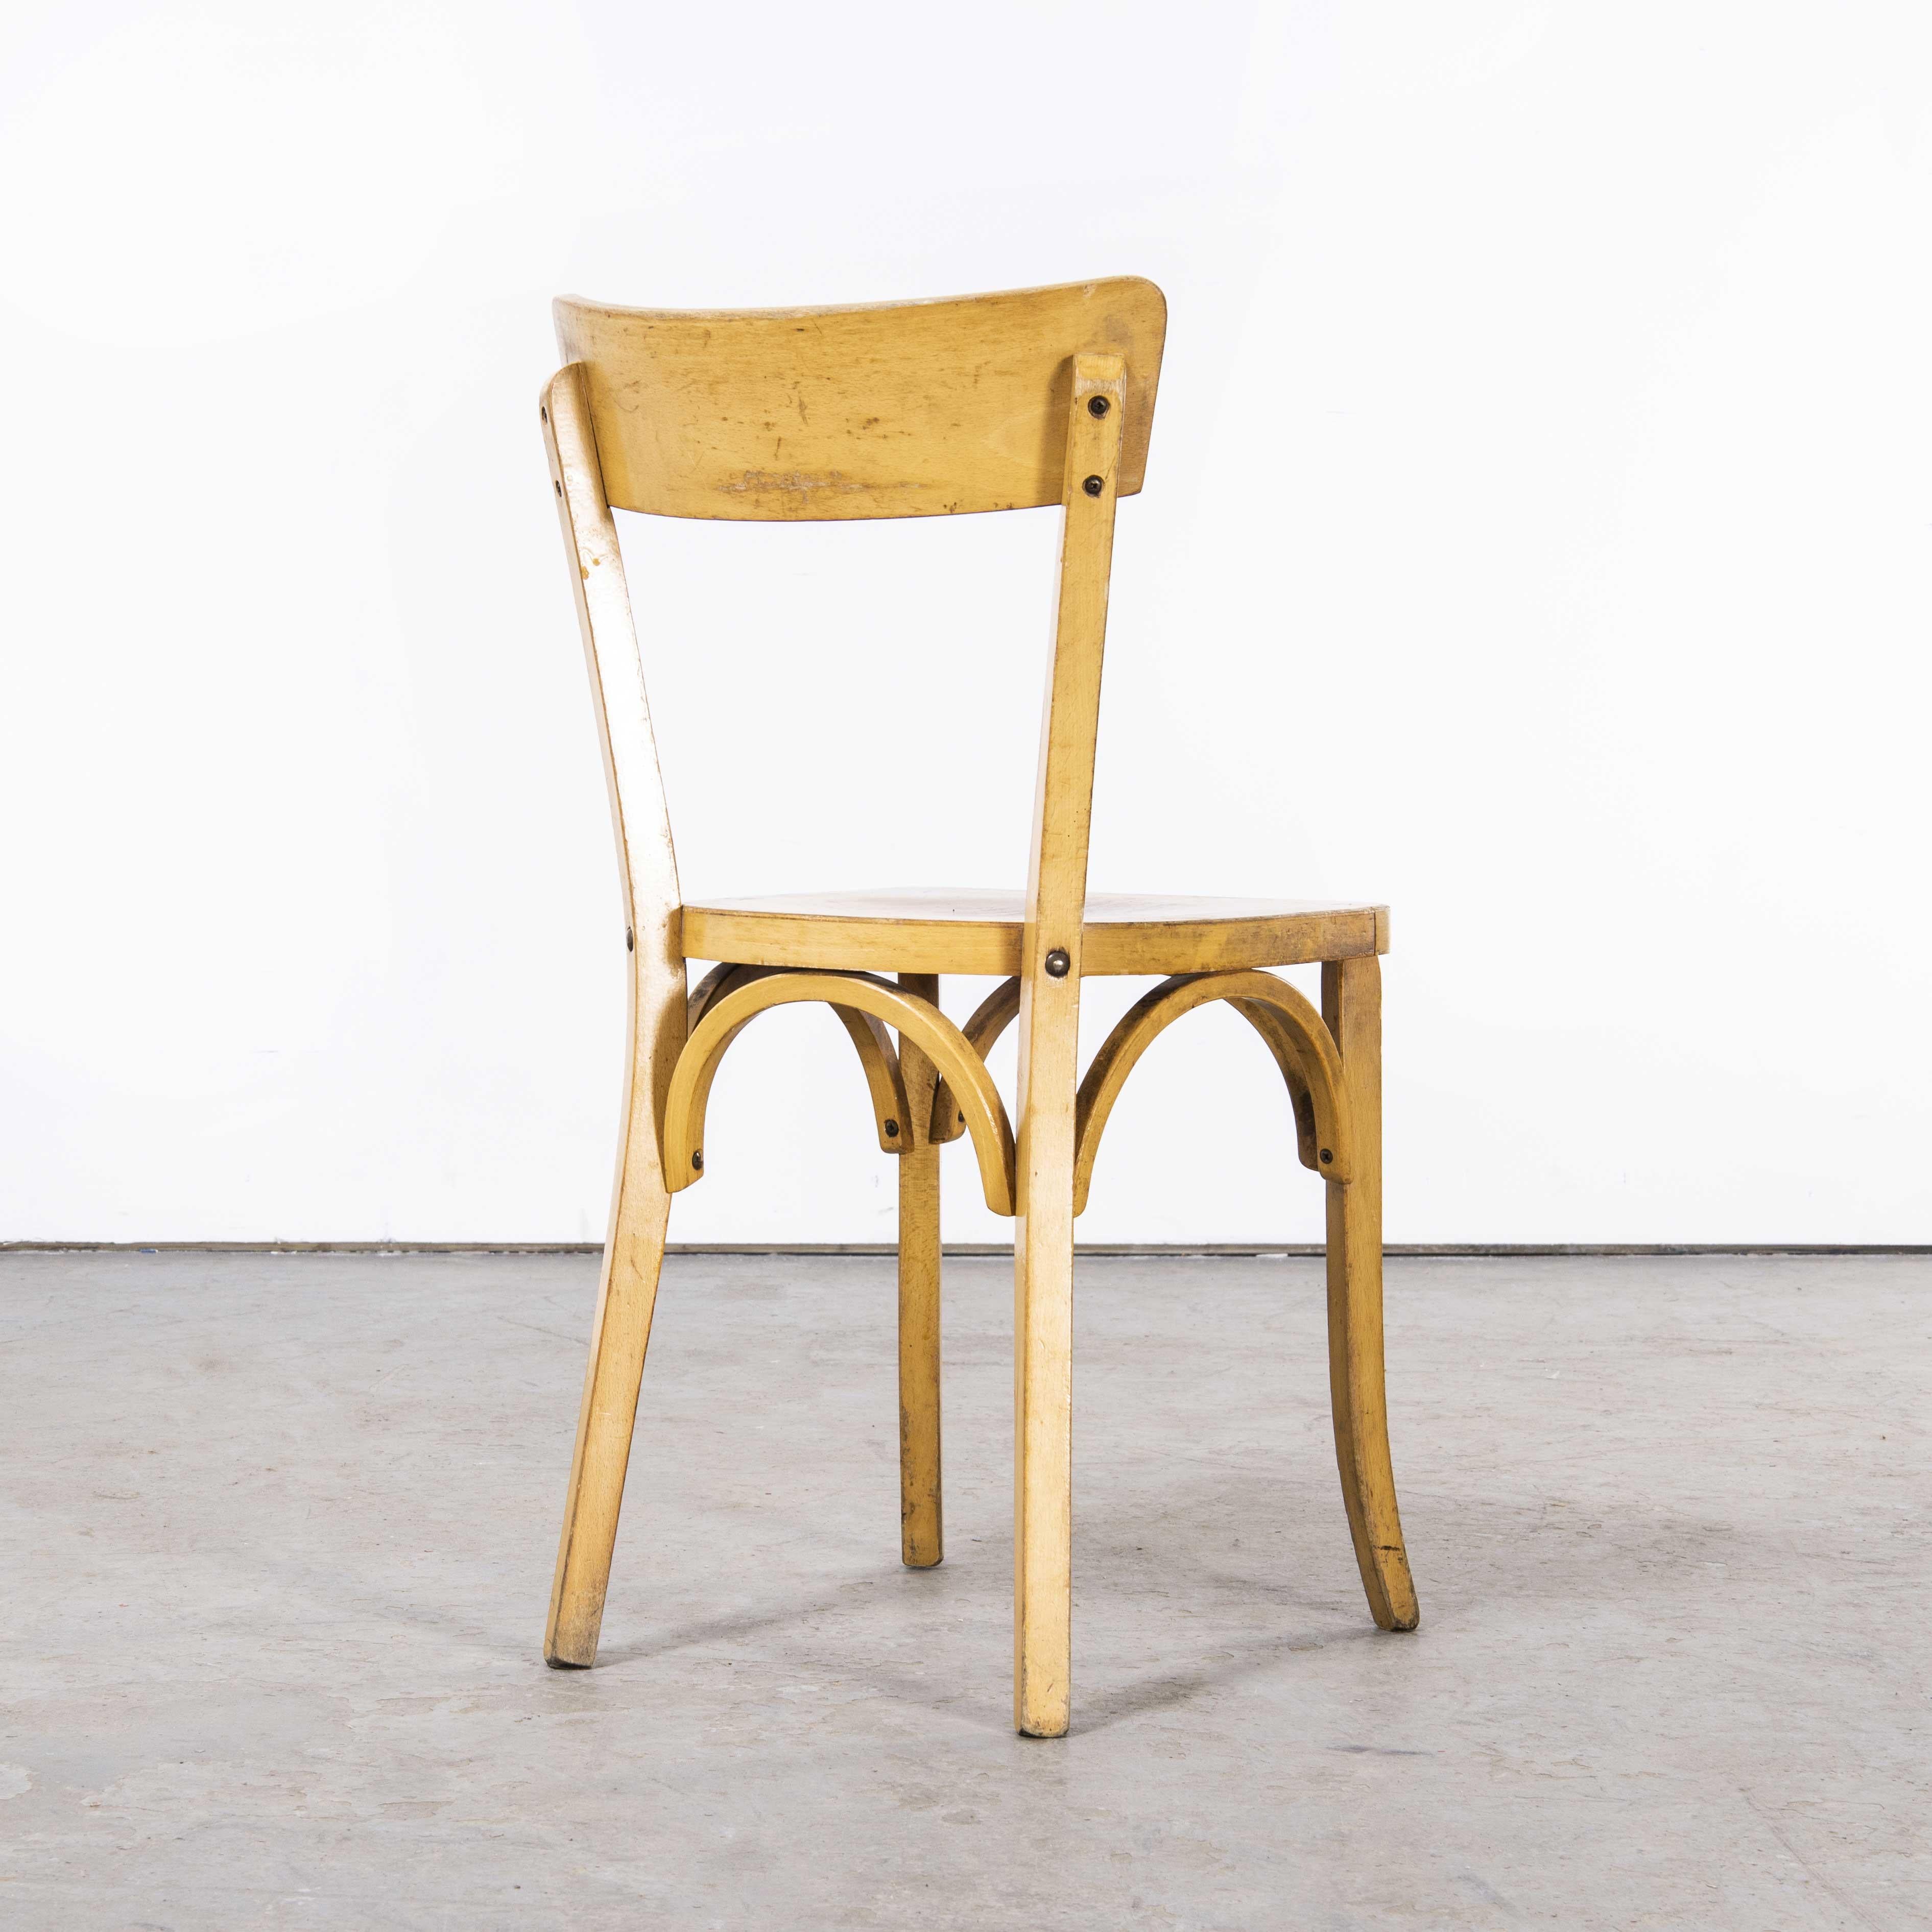 1950’s French Baumann blonde slim back bentwood dining chairs – harlequin set of six
1950’s French Baumann blonde slim back bentwood dining chairs – harlequin set of six. Baumann is a slightly off the radar French producer just starting to gain